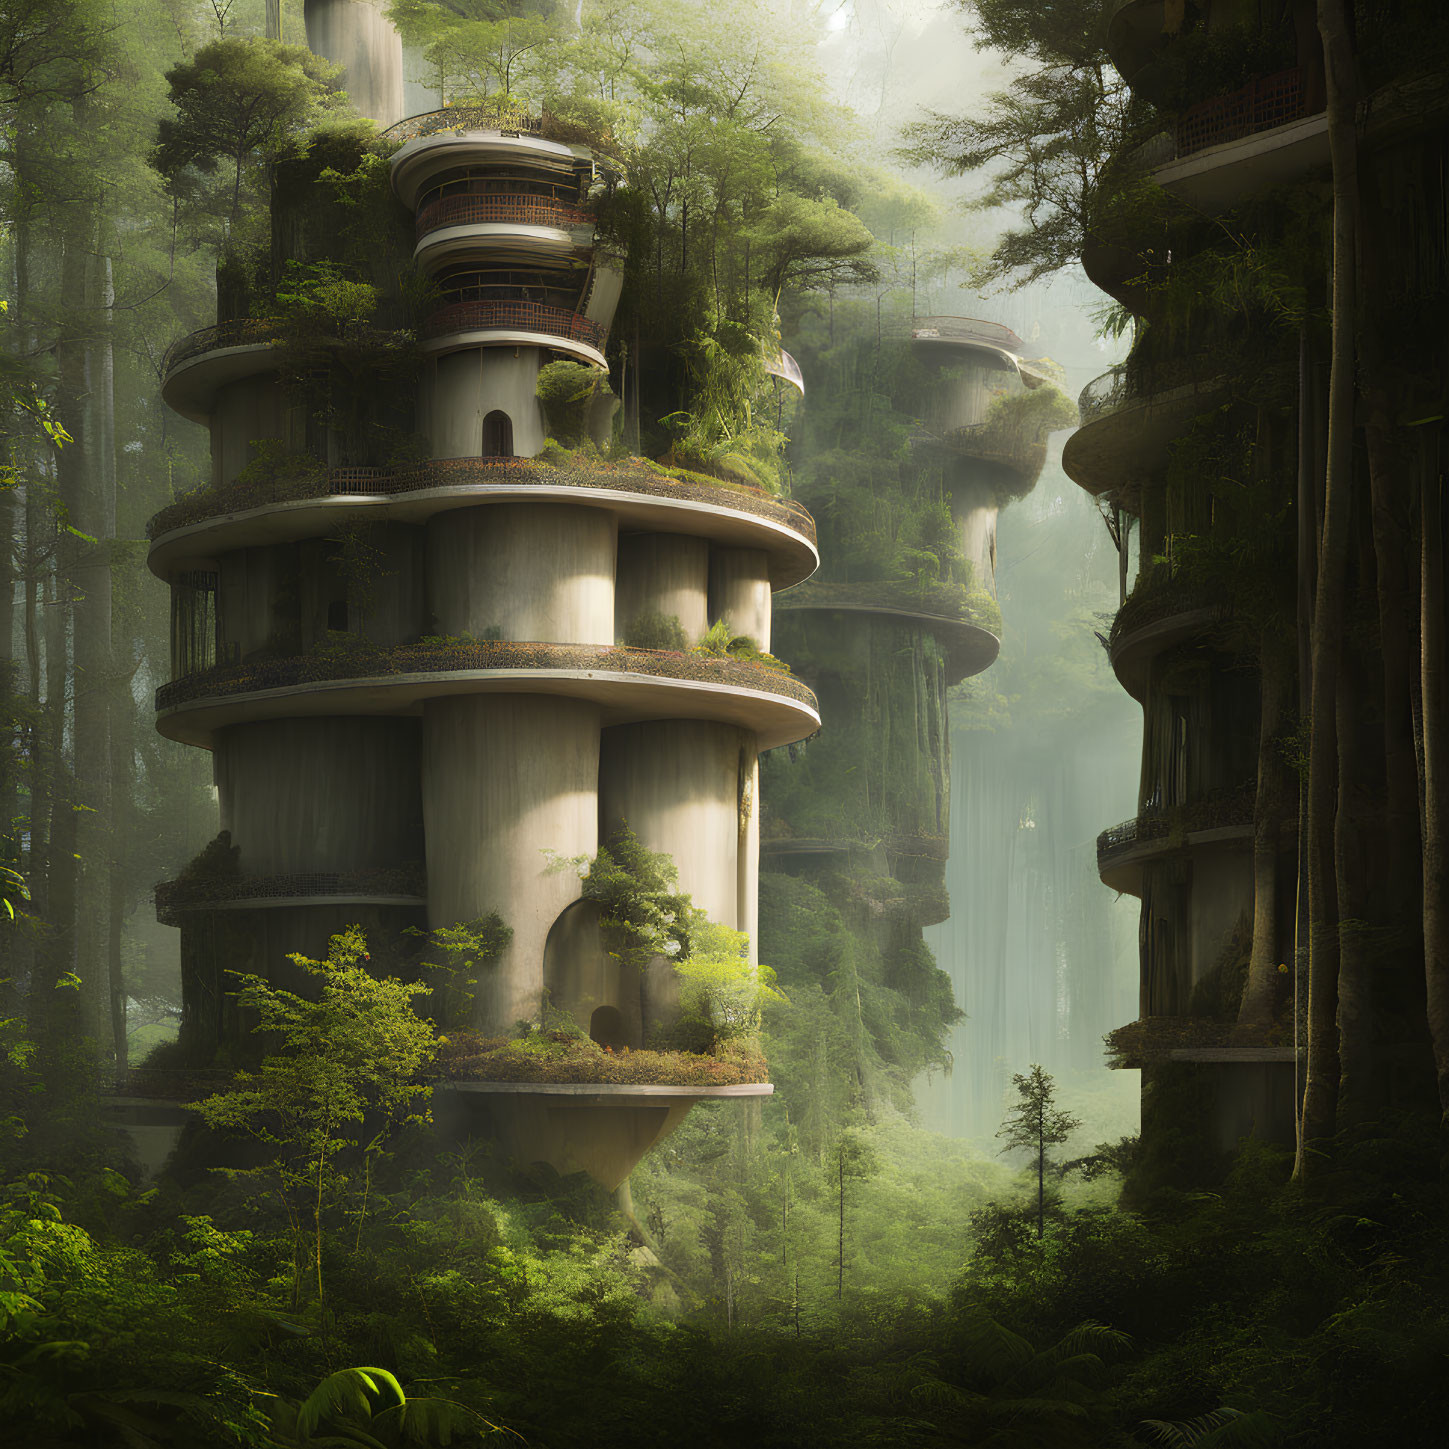 Mysterious cylindrical towers in misty forest with overgrown vegetation